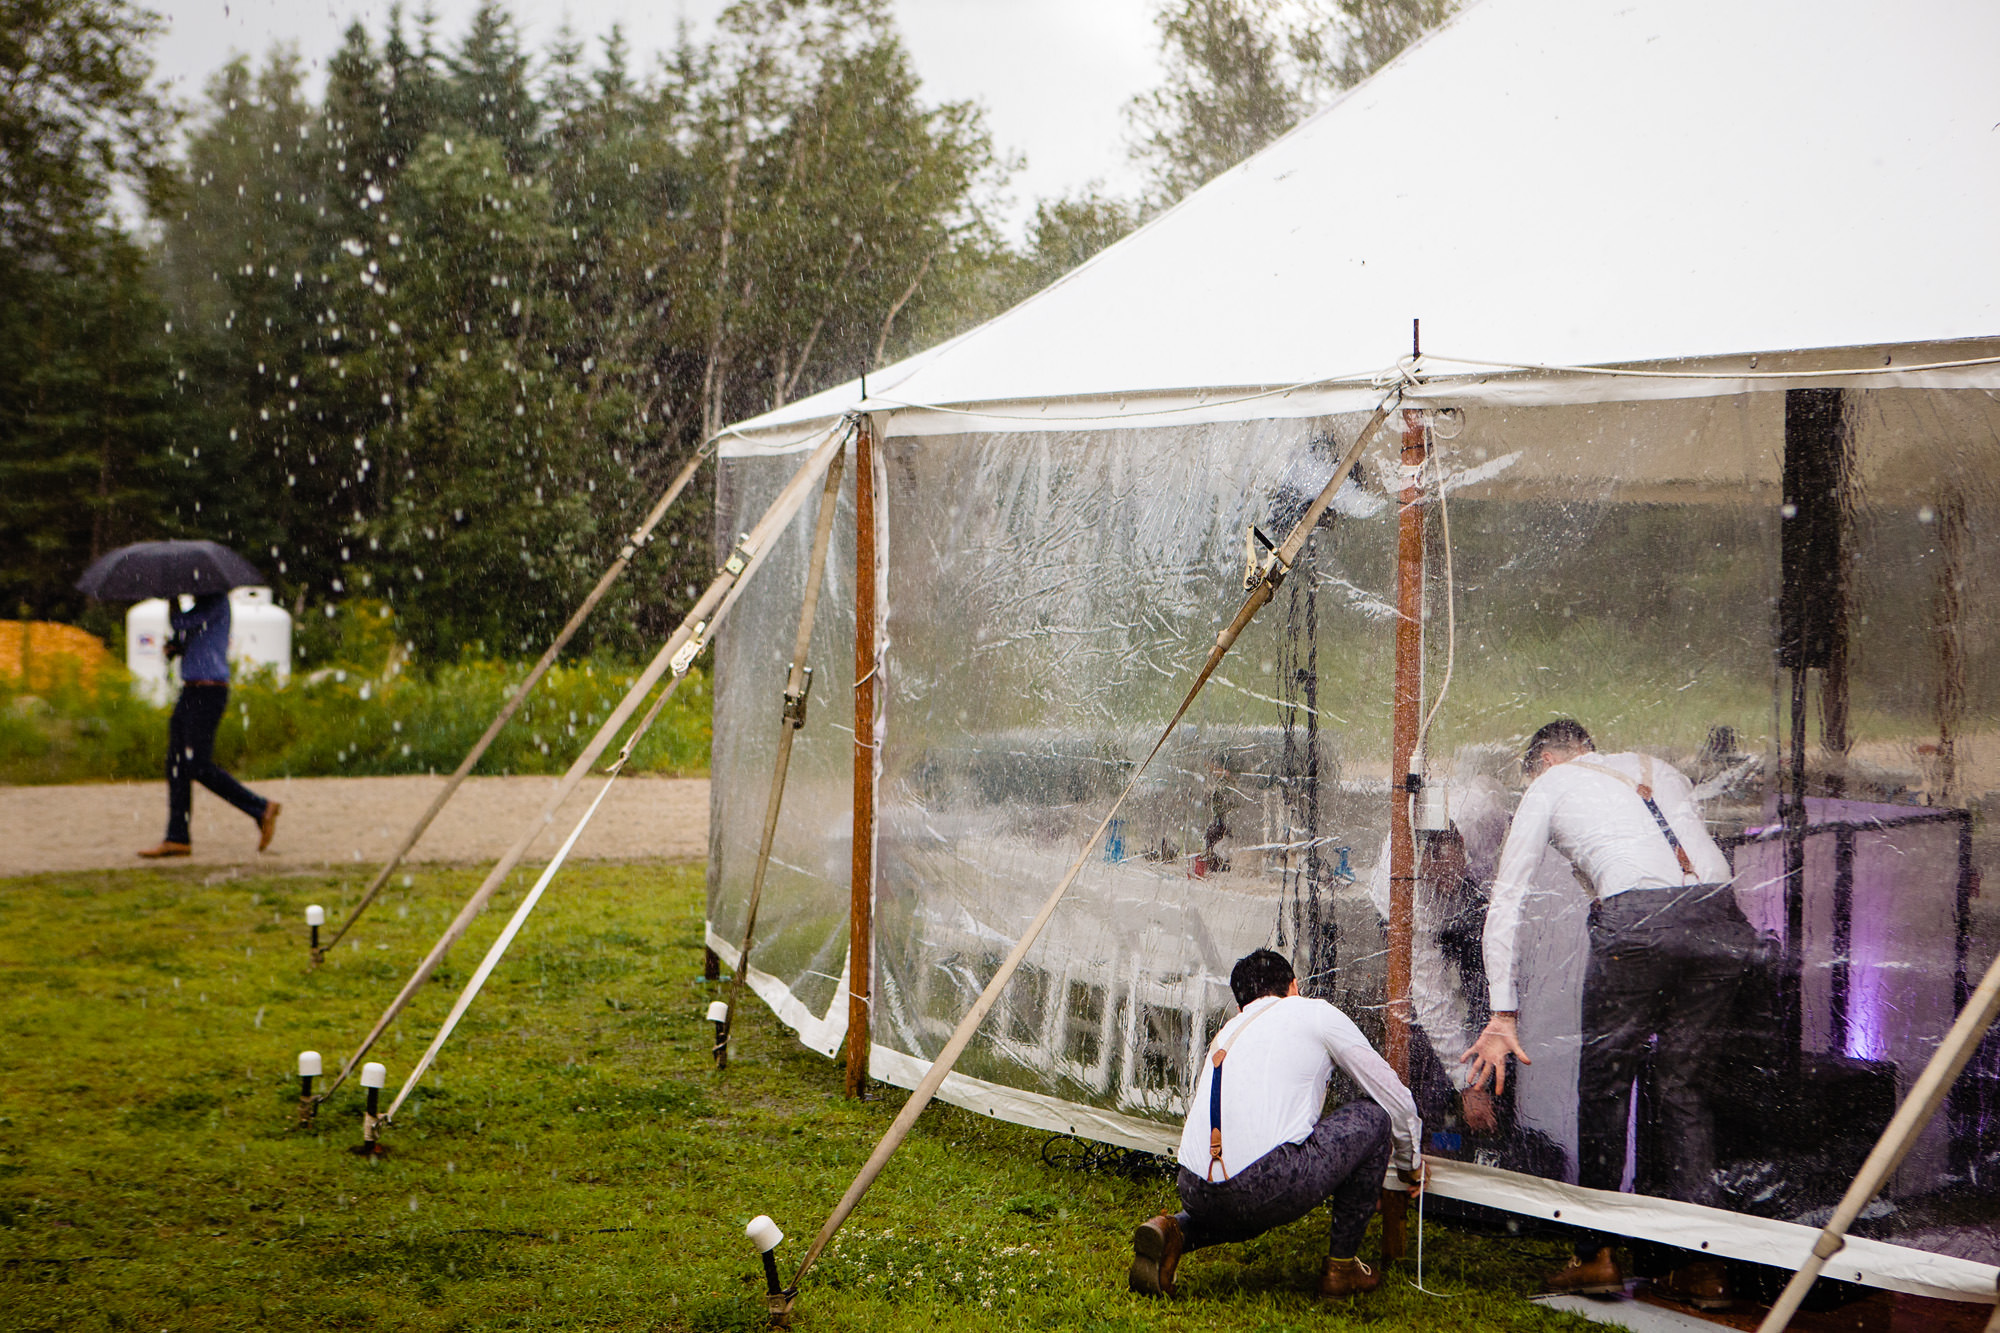 The groomsmen secure the tent during a hailstorm at a summer wedding in Maine